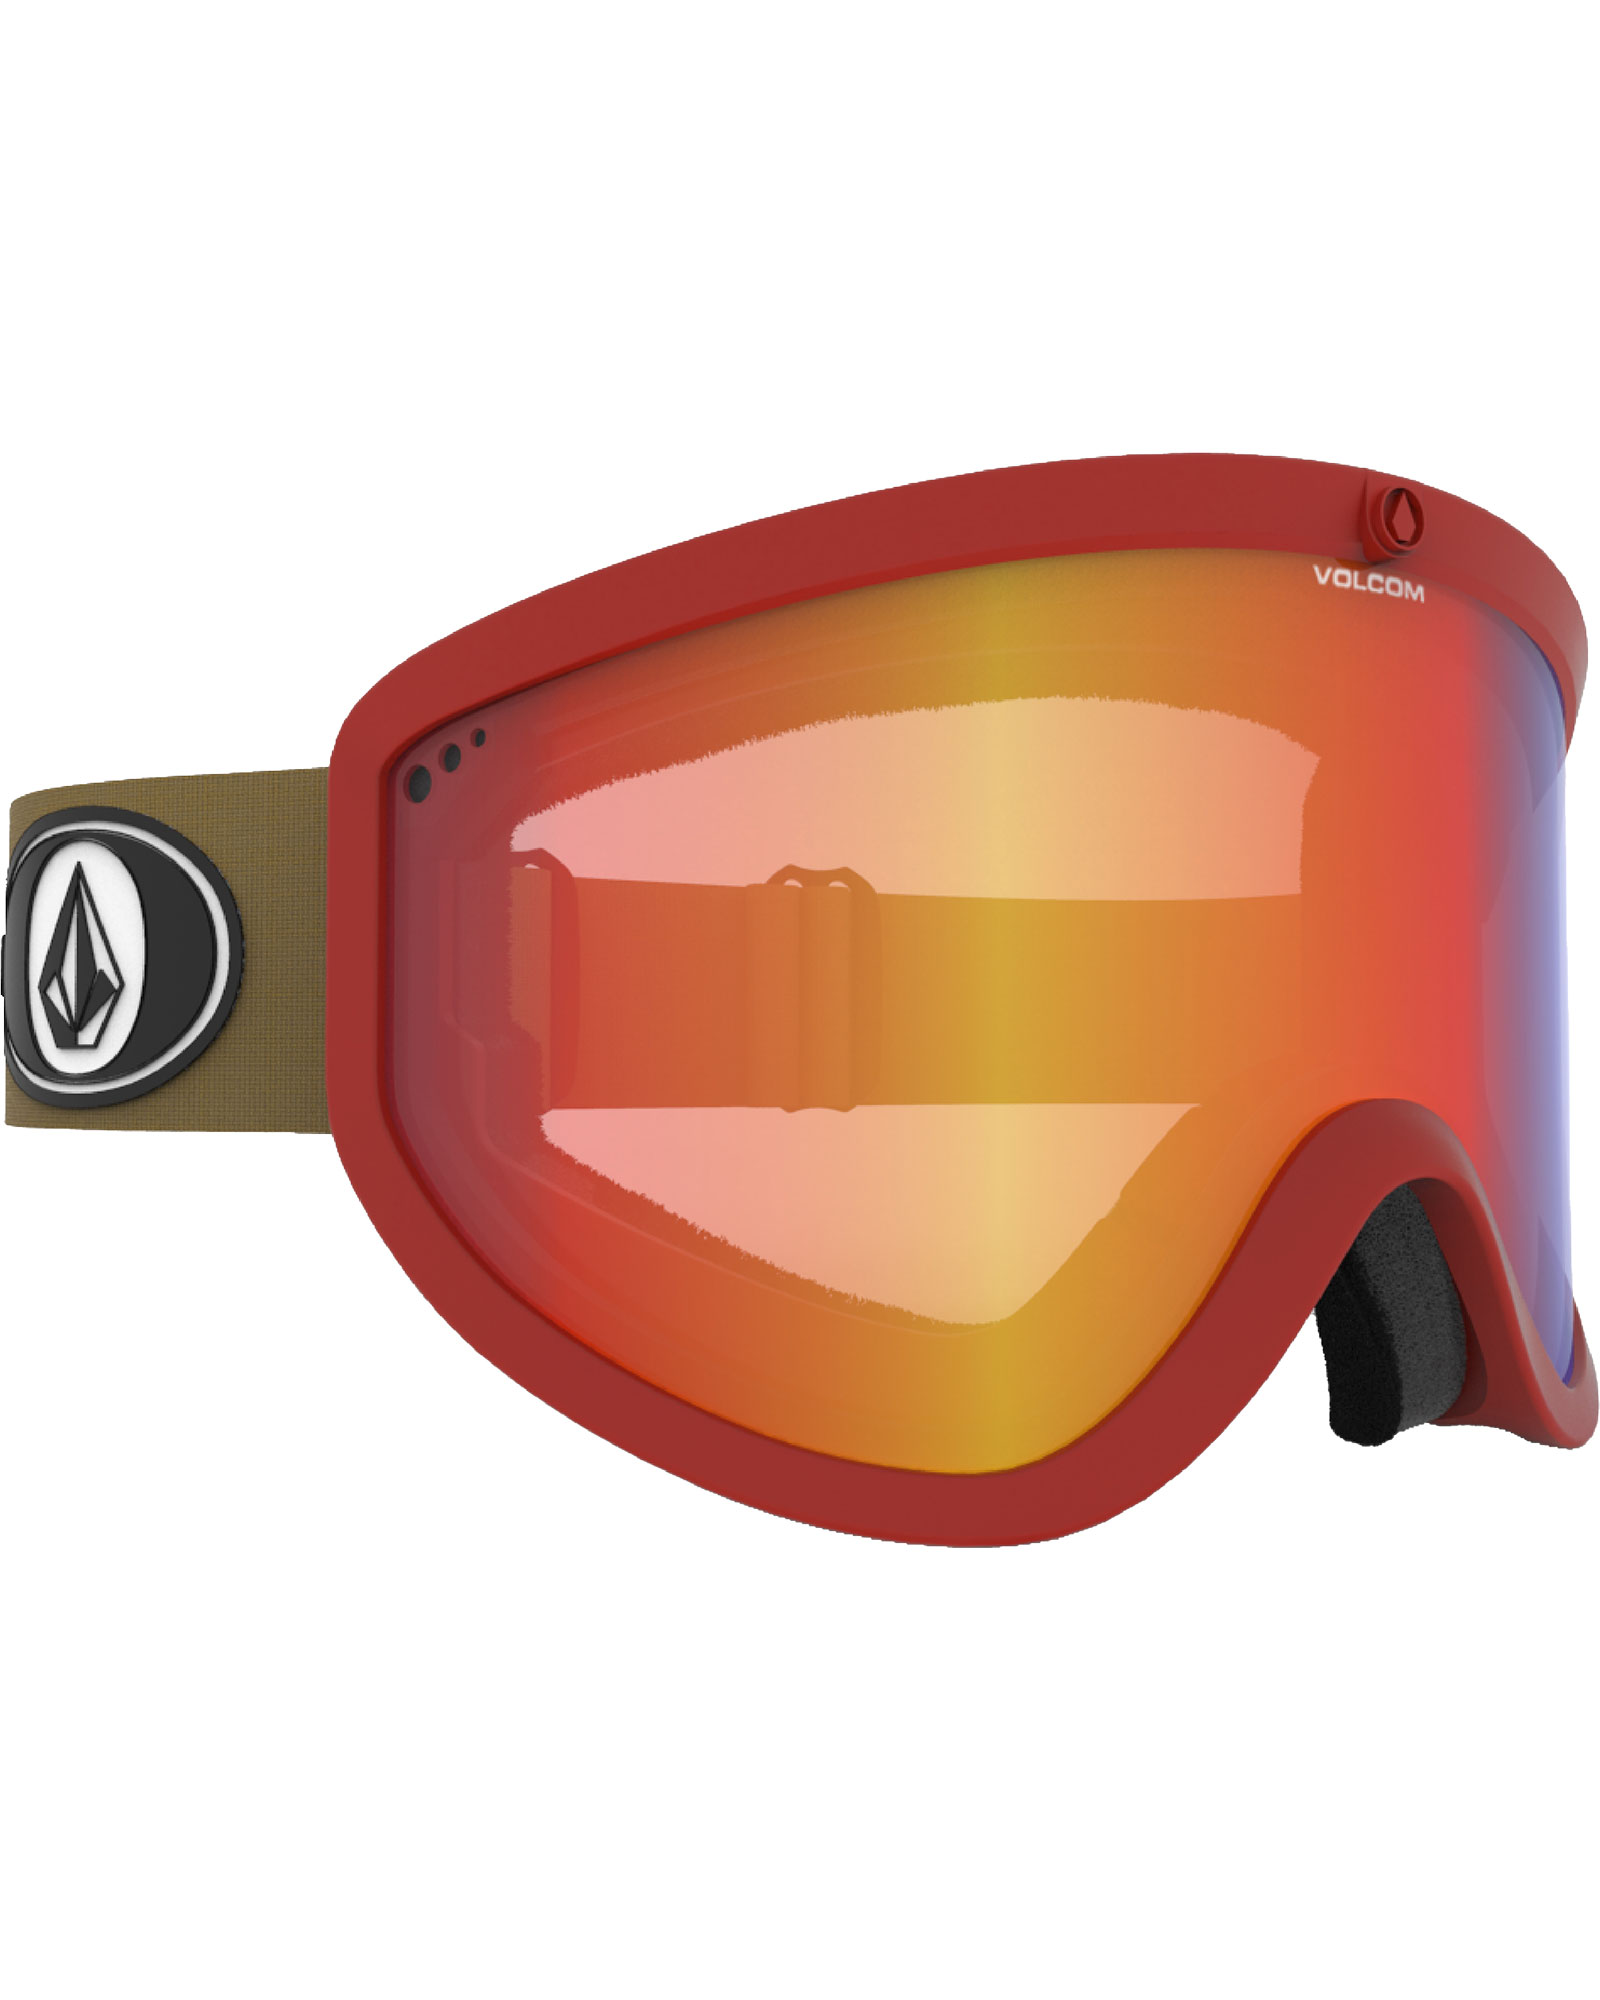 Volcom Footprints Red/Charamel / Red Chrome Goggles - Red/Charamel